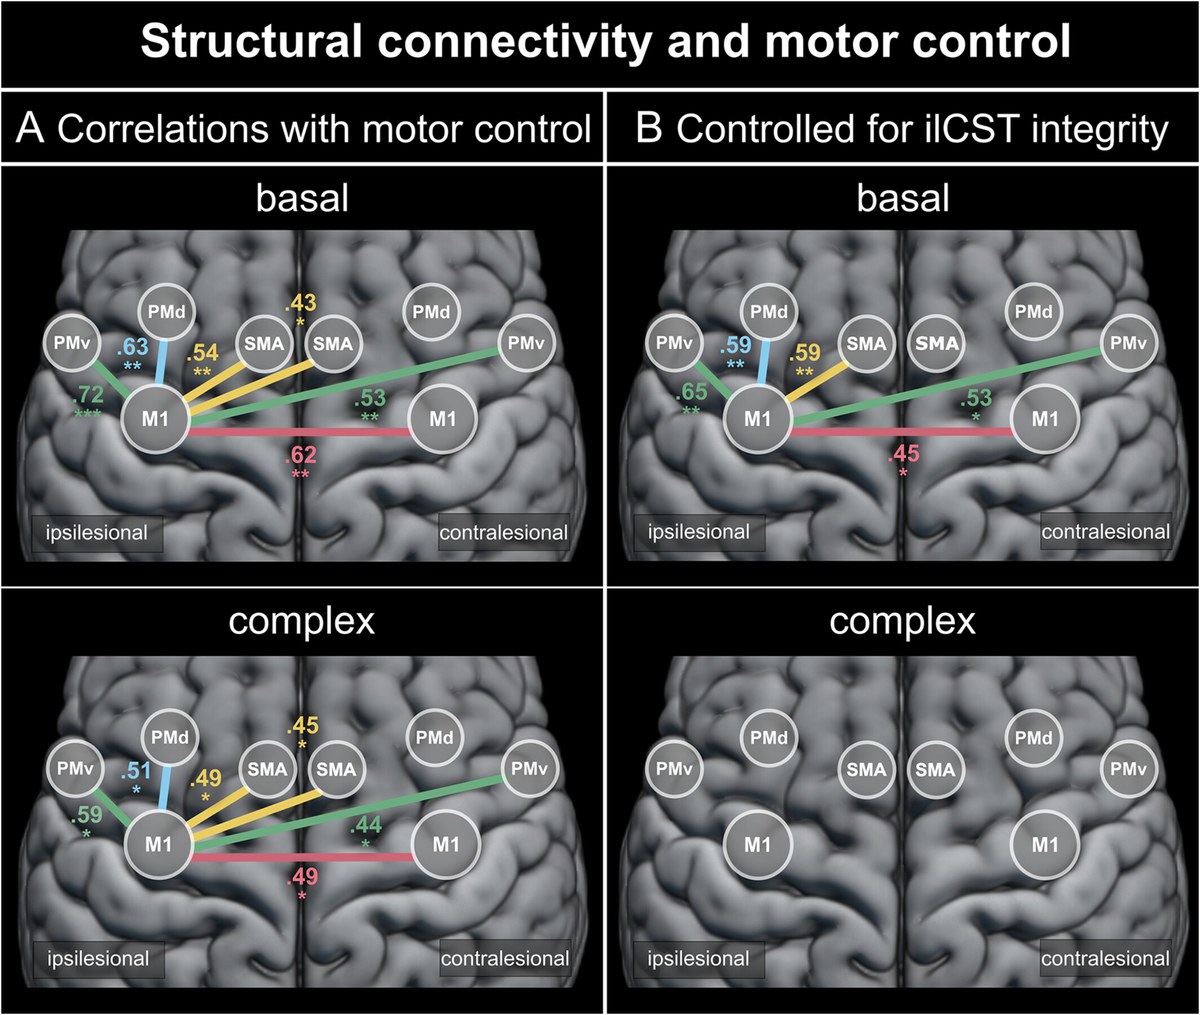 Interhemispheric structural connectivity underlies motor recovery after stroke